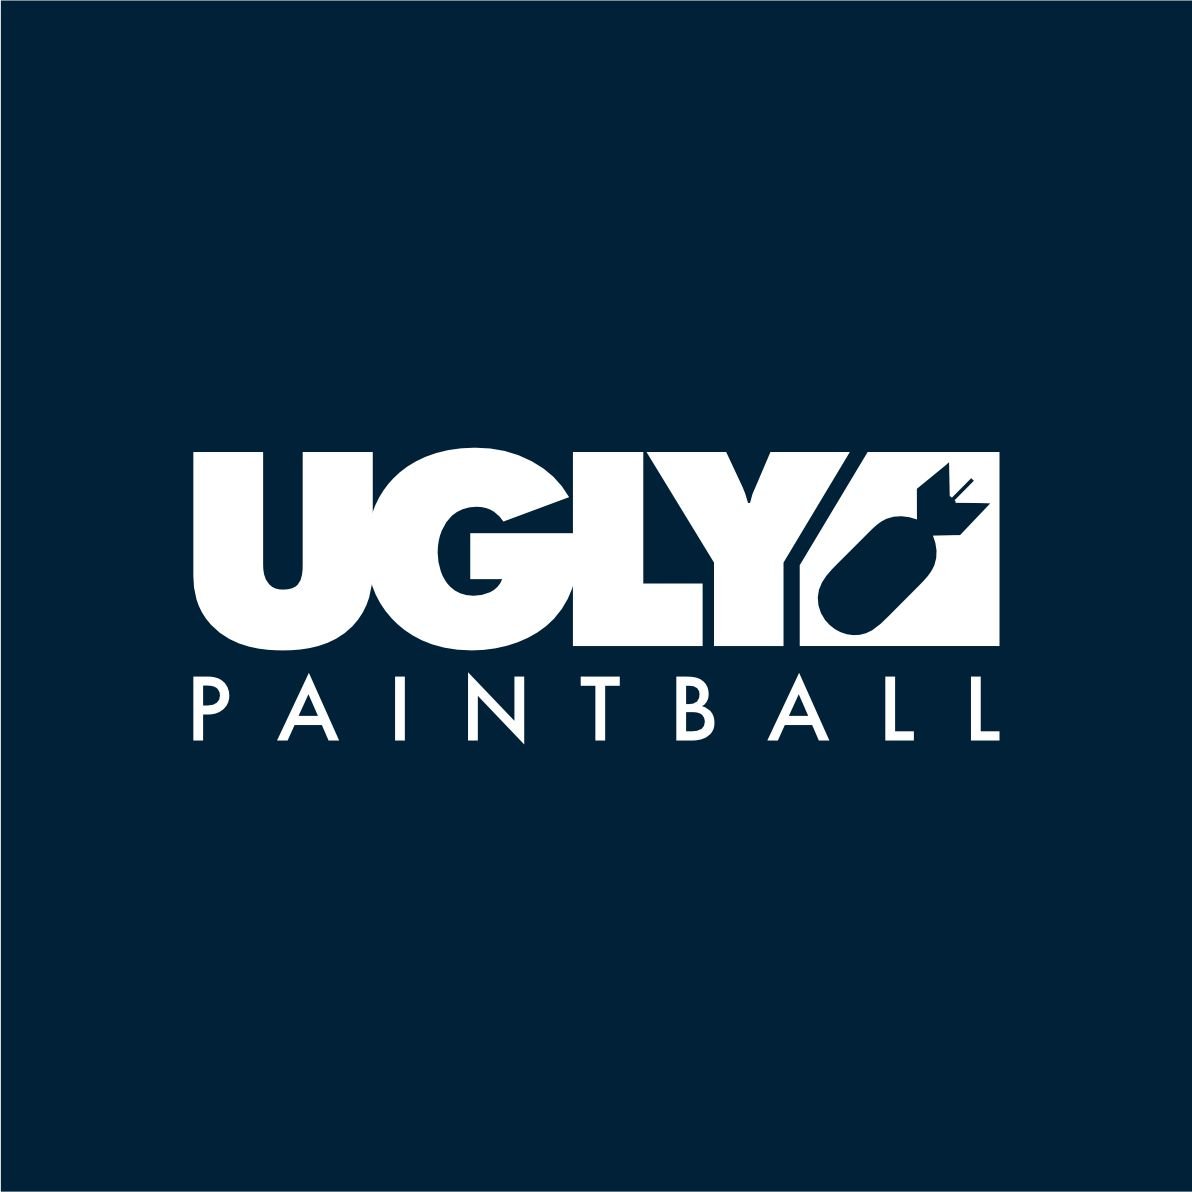 UGLY PAINTBALL